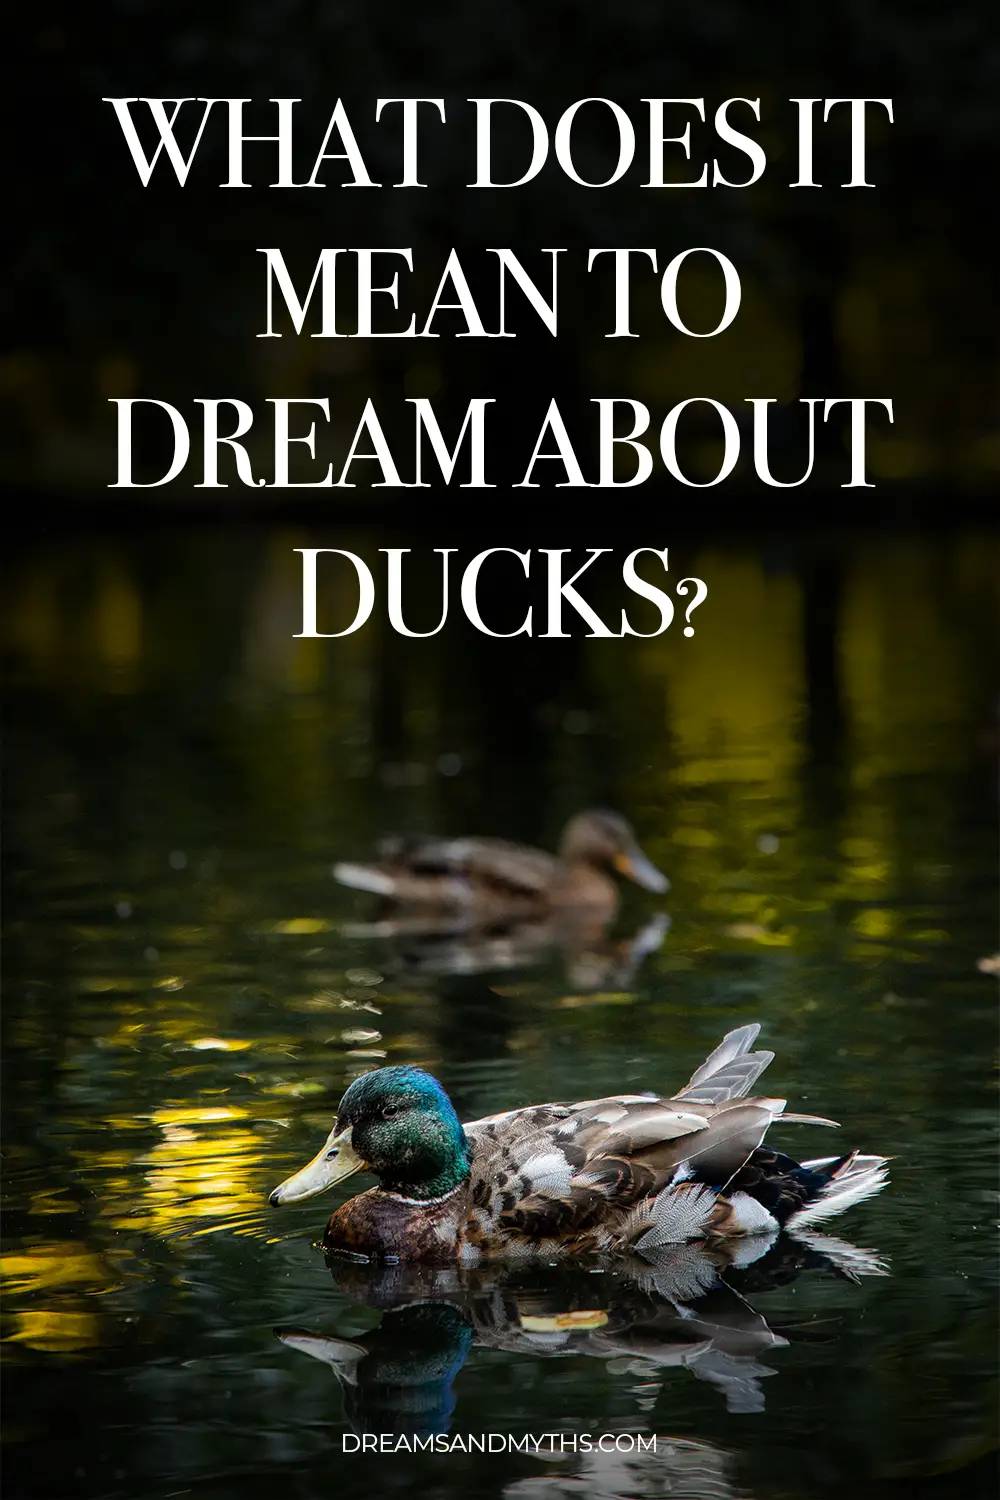 What Does It Mean To Dream About Ducks